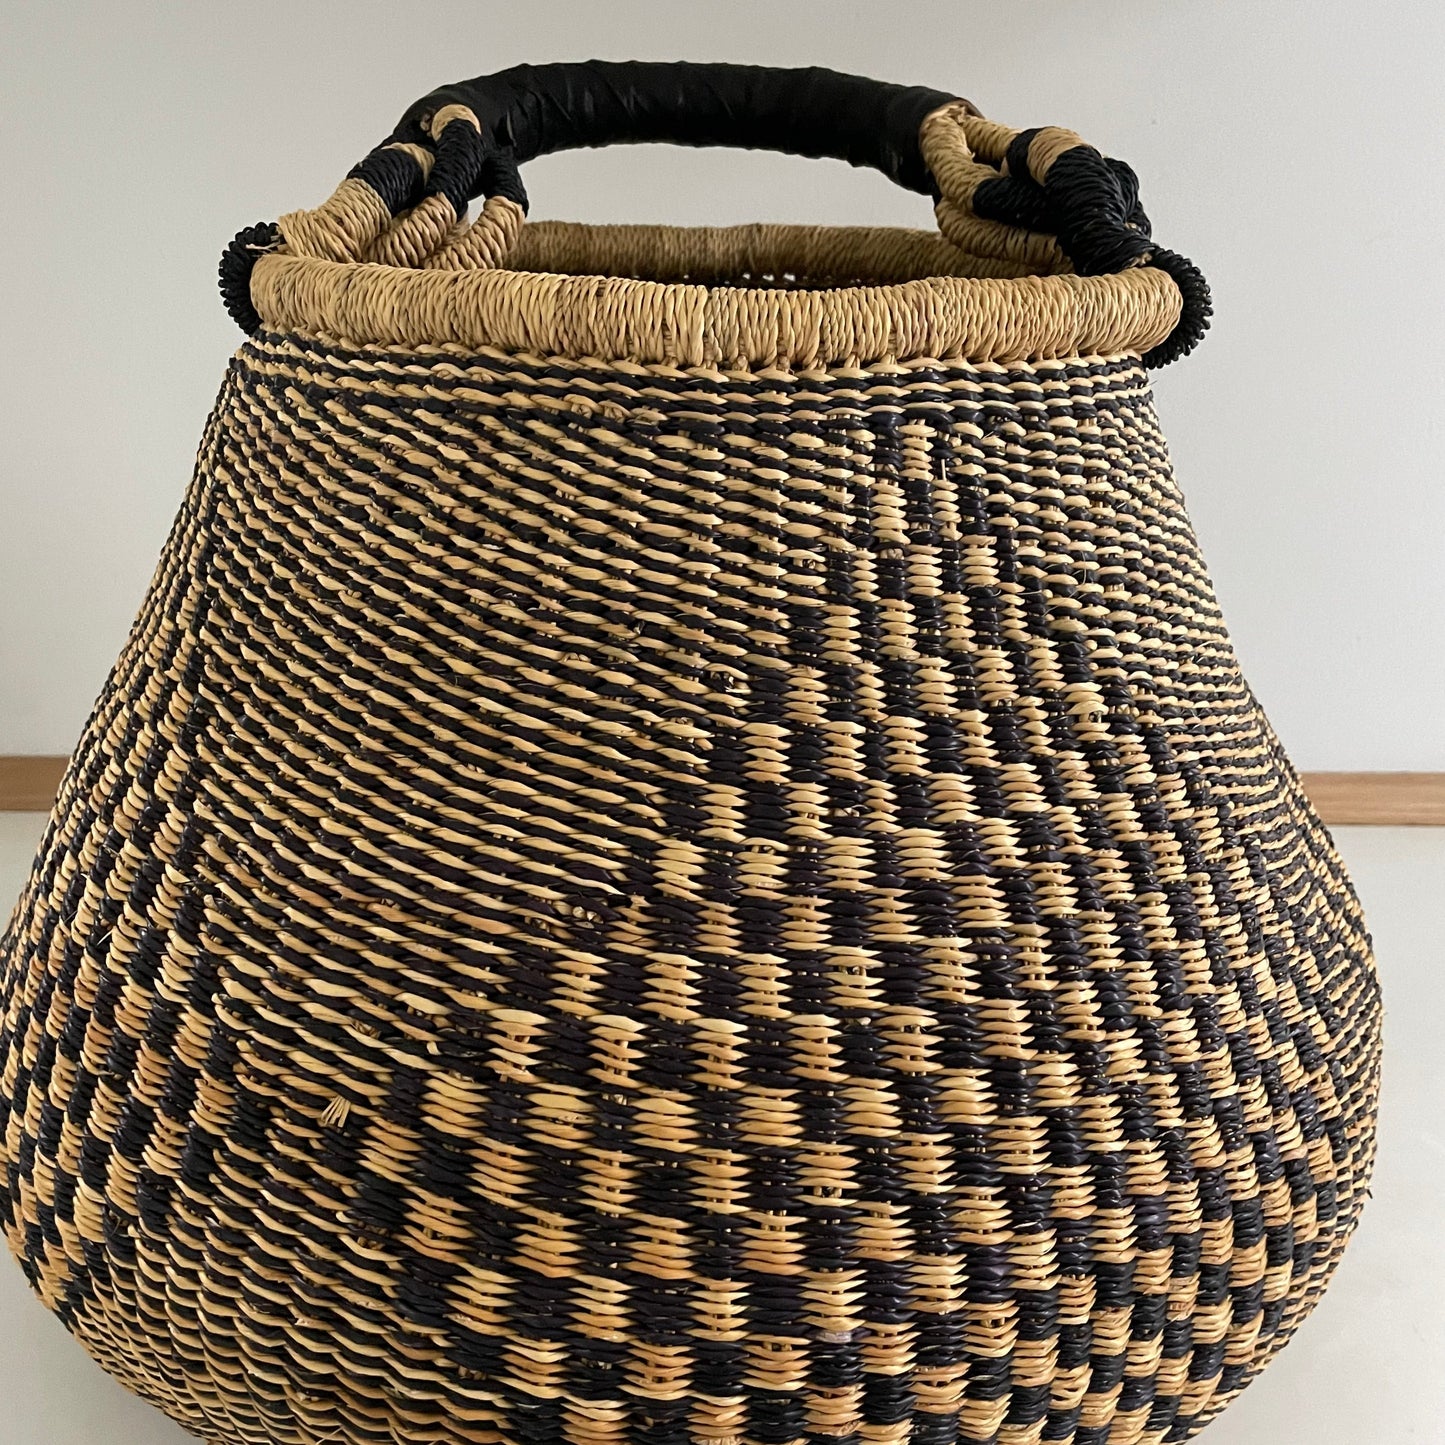 Pot basket. Woven basket in sea grass with sustainable materials. Nature colored. Leather handle. Fair Trade from Ghana